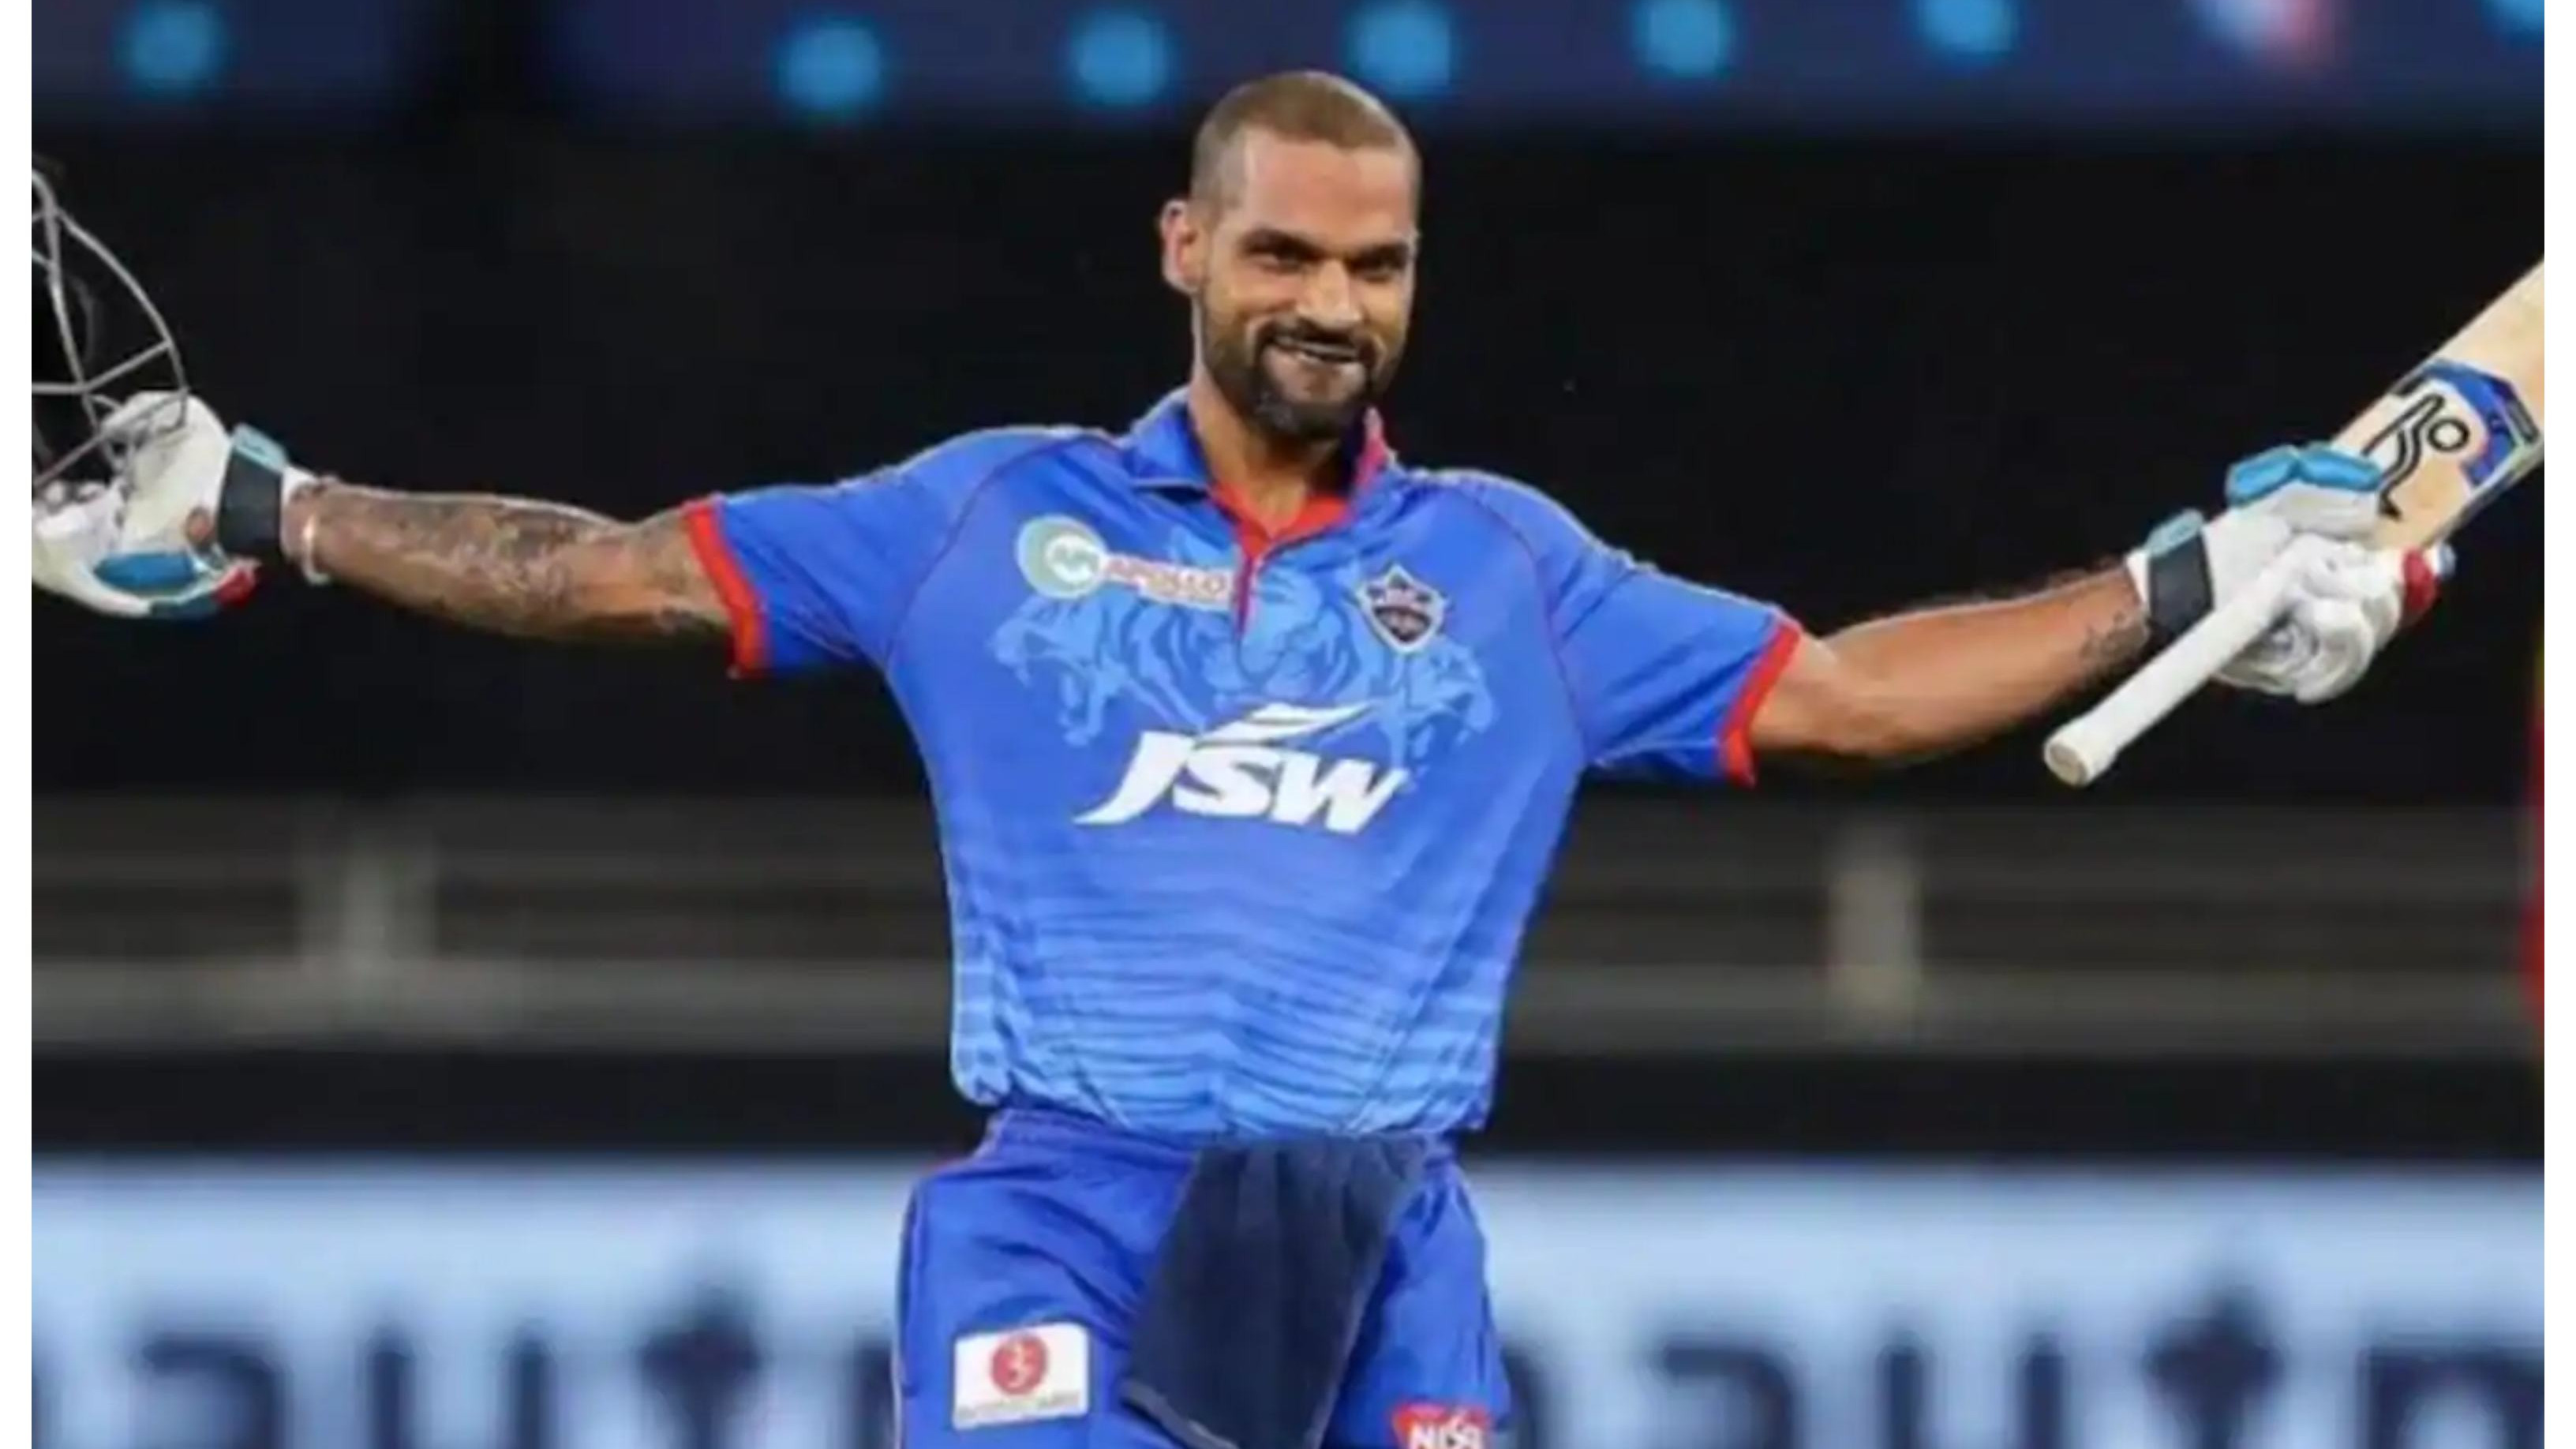 ‘Keep on working hard to turn your dreams into reality’, Shikhar Dhawan’s motivational post on Instagram